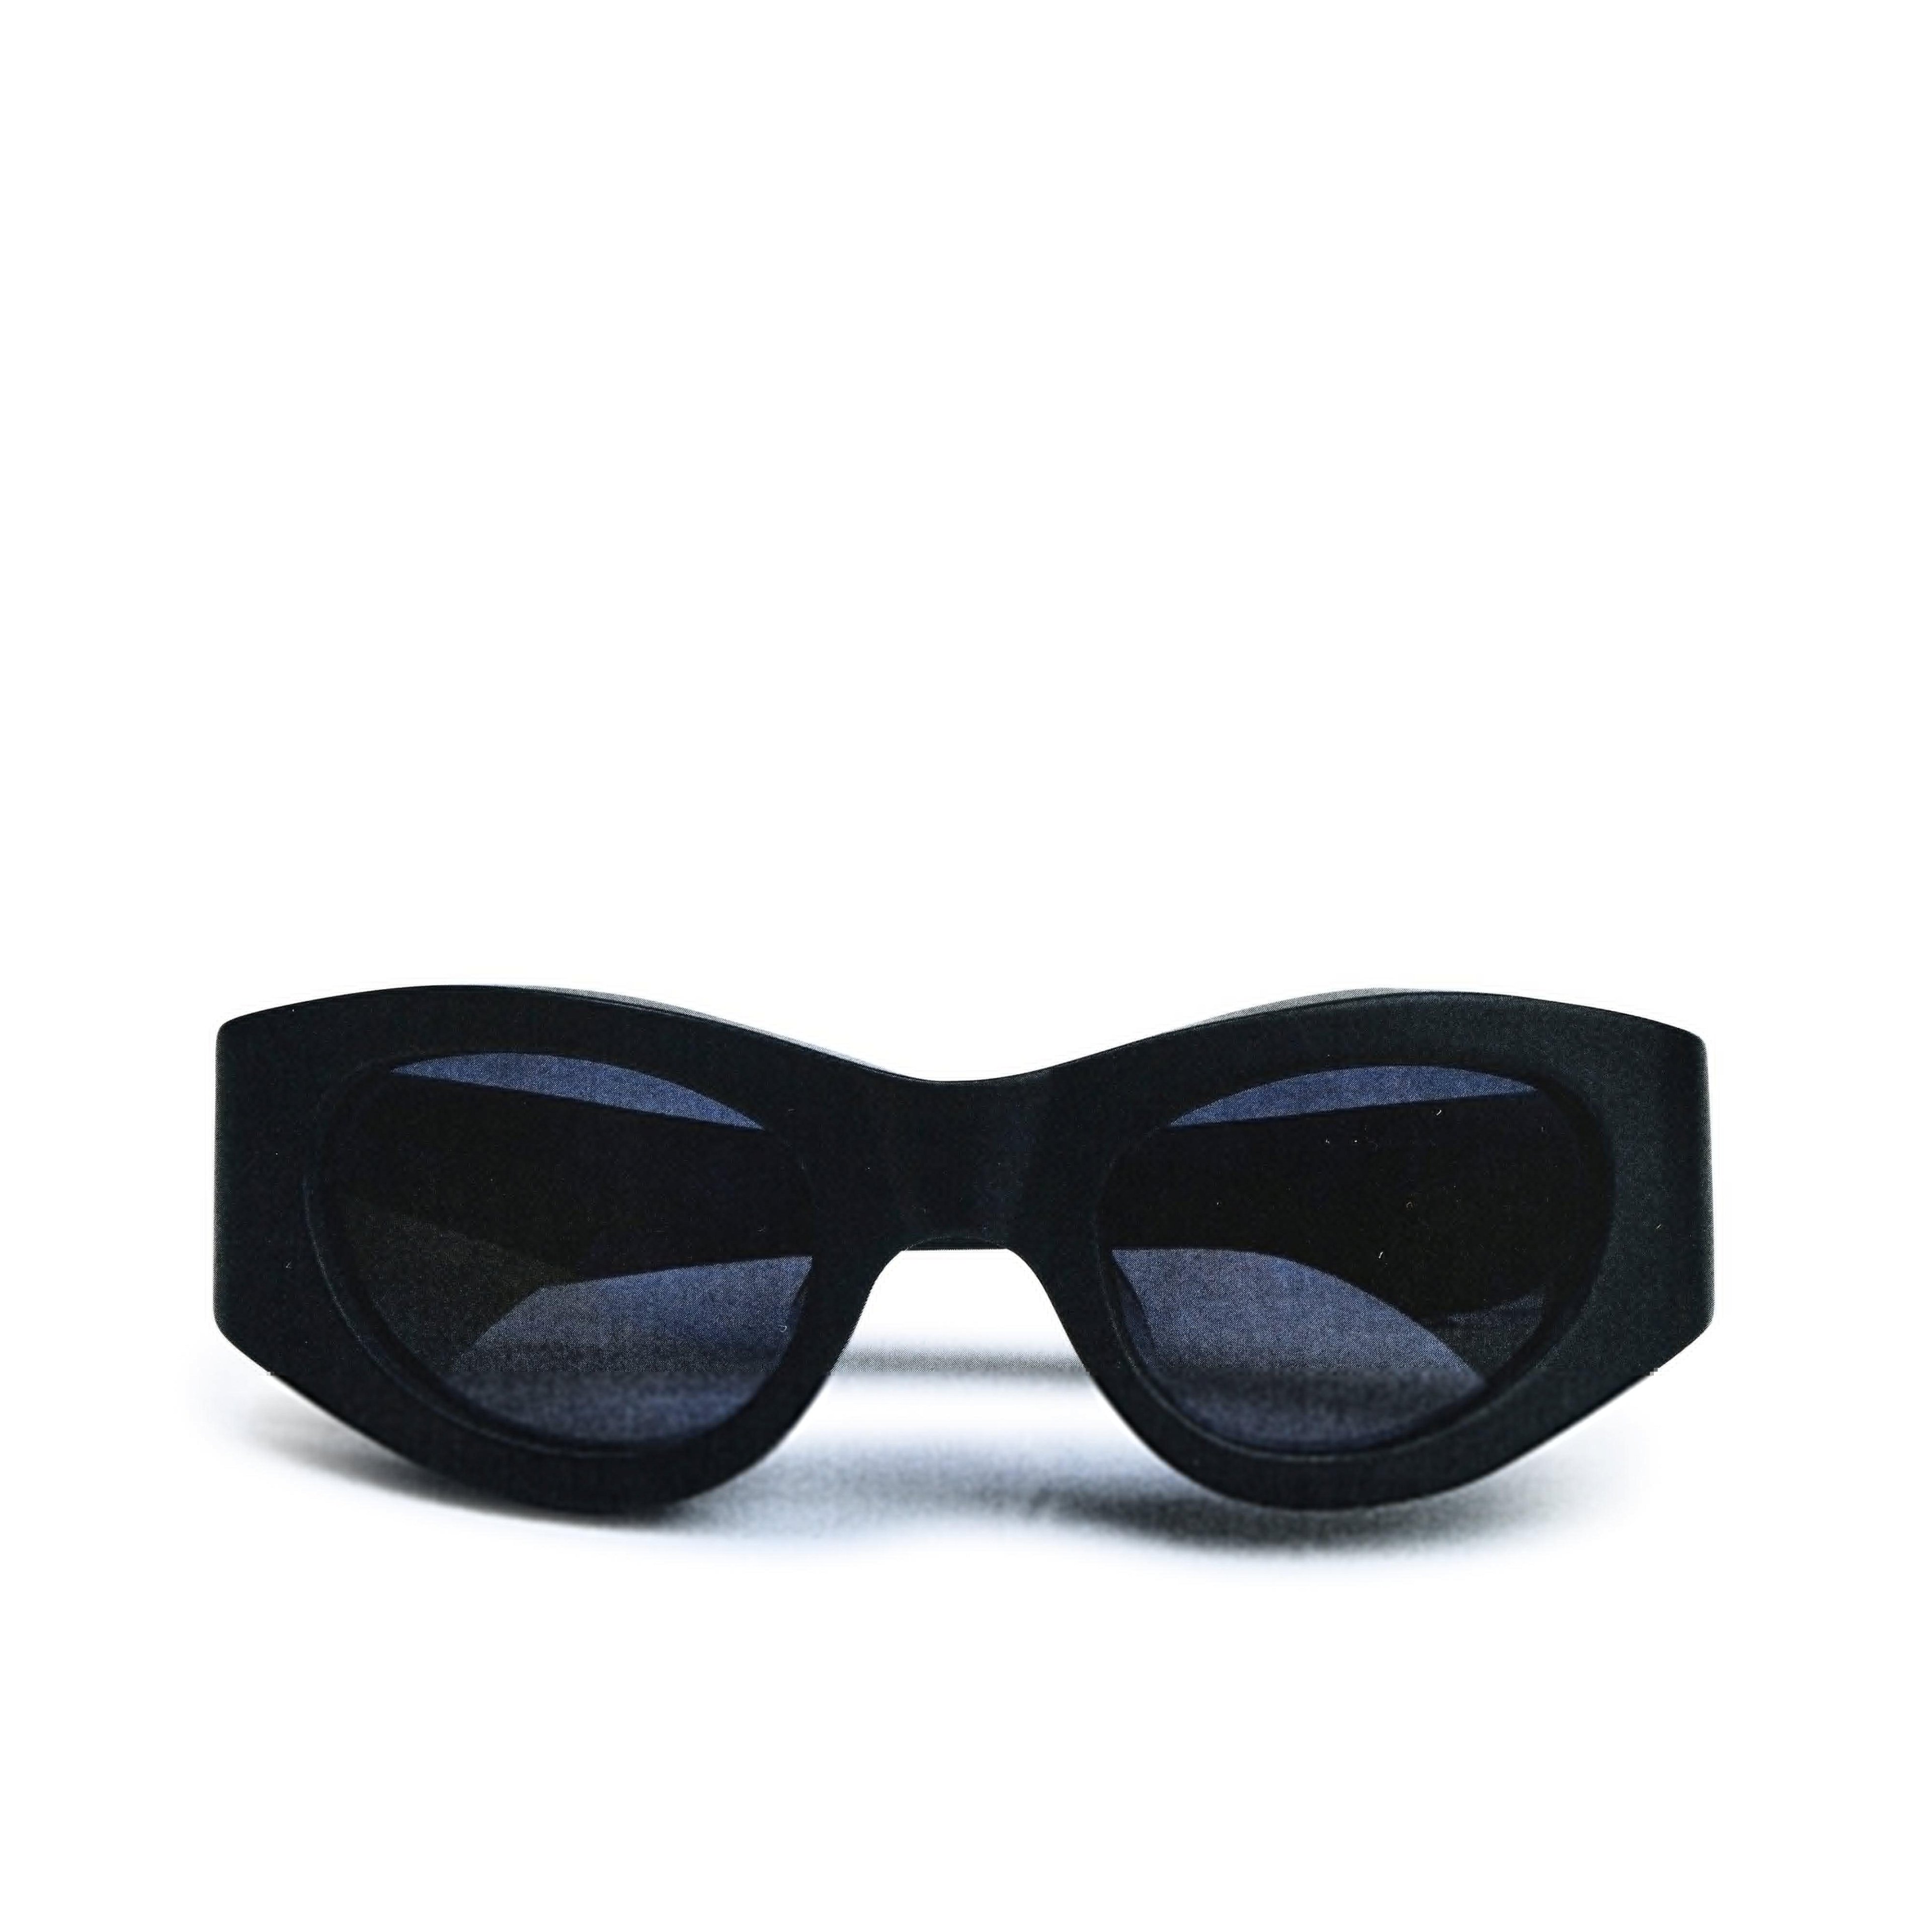 ERL - Bro Sunglasses - (Black) by ERL